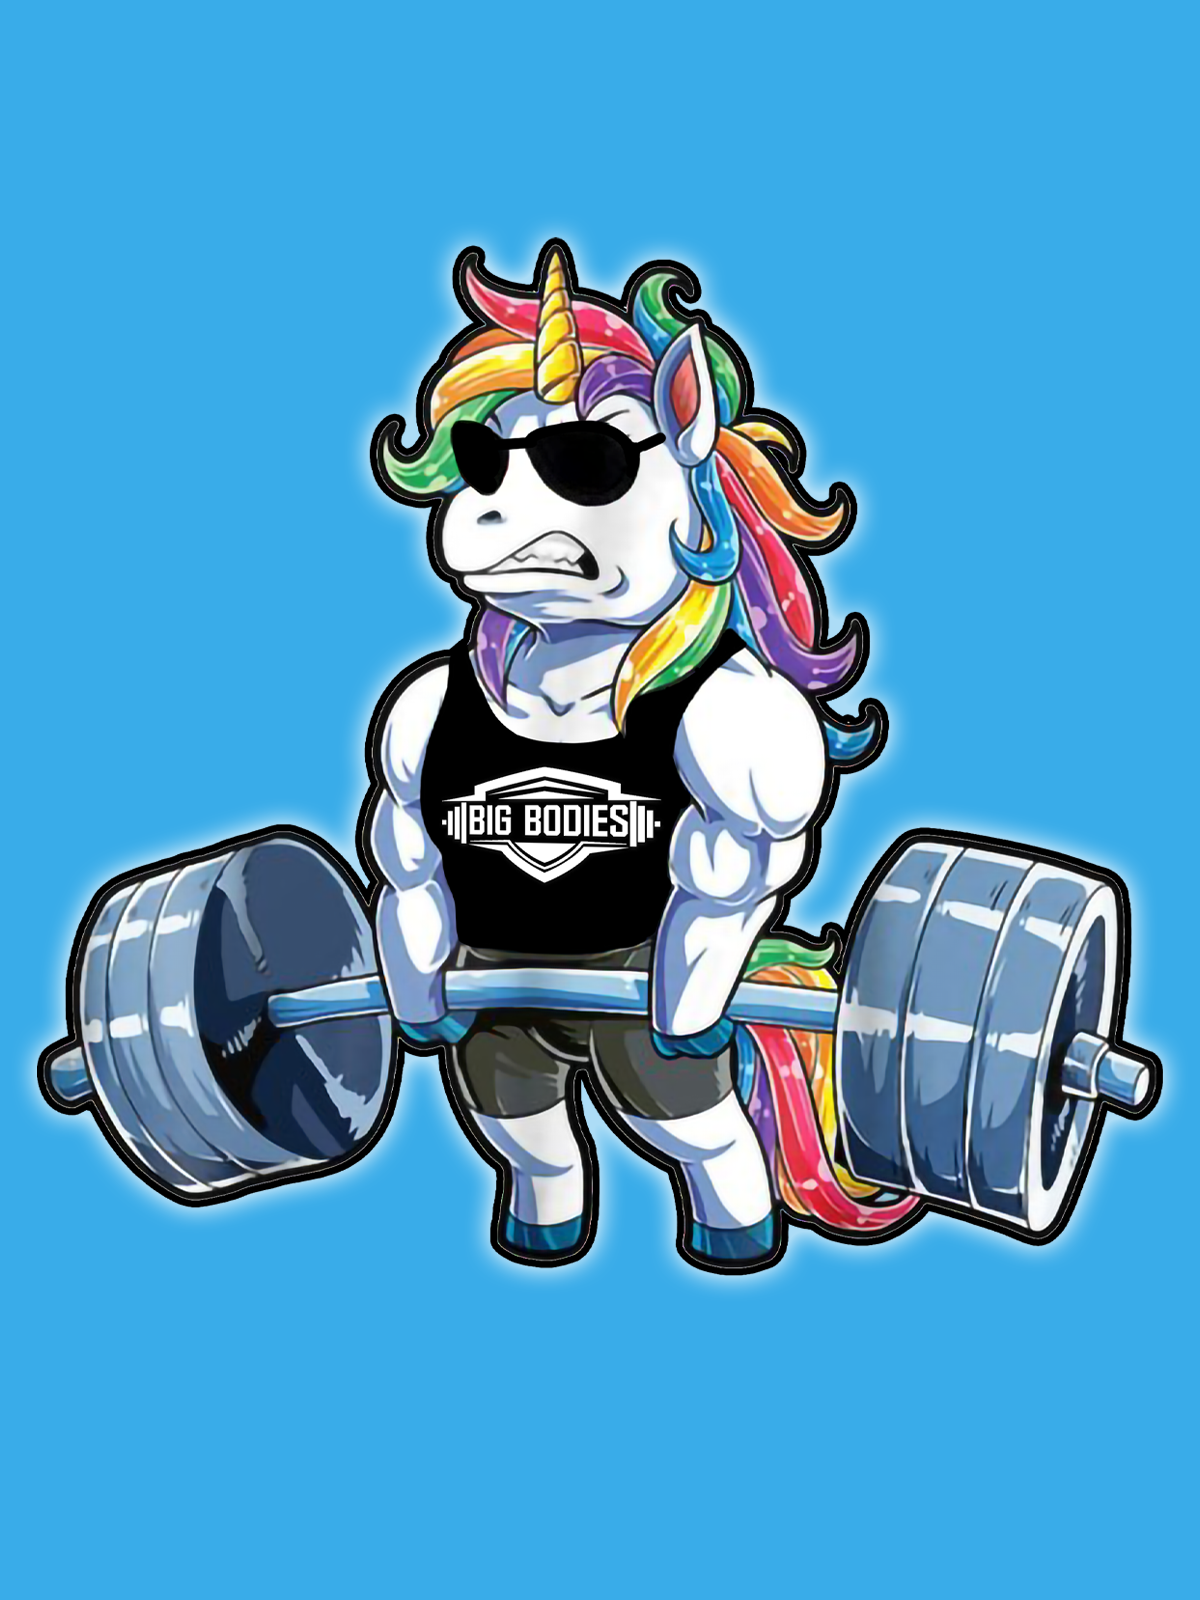 Weights Before Dates Unicorn Gym Weight Lifting Shirt & Tank Top